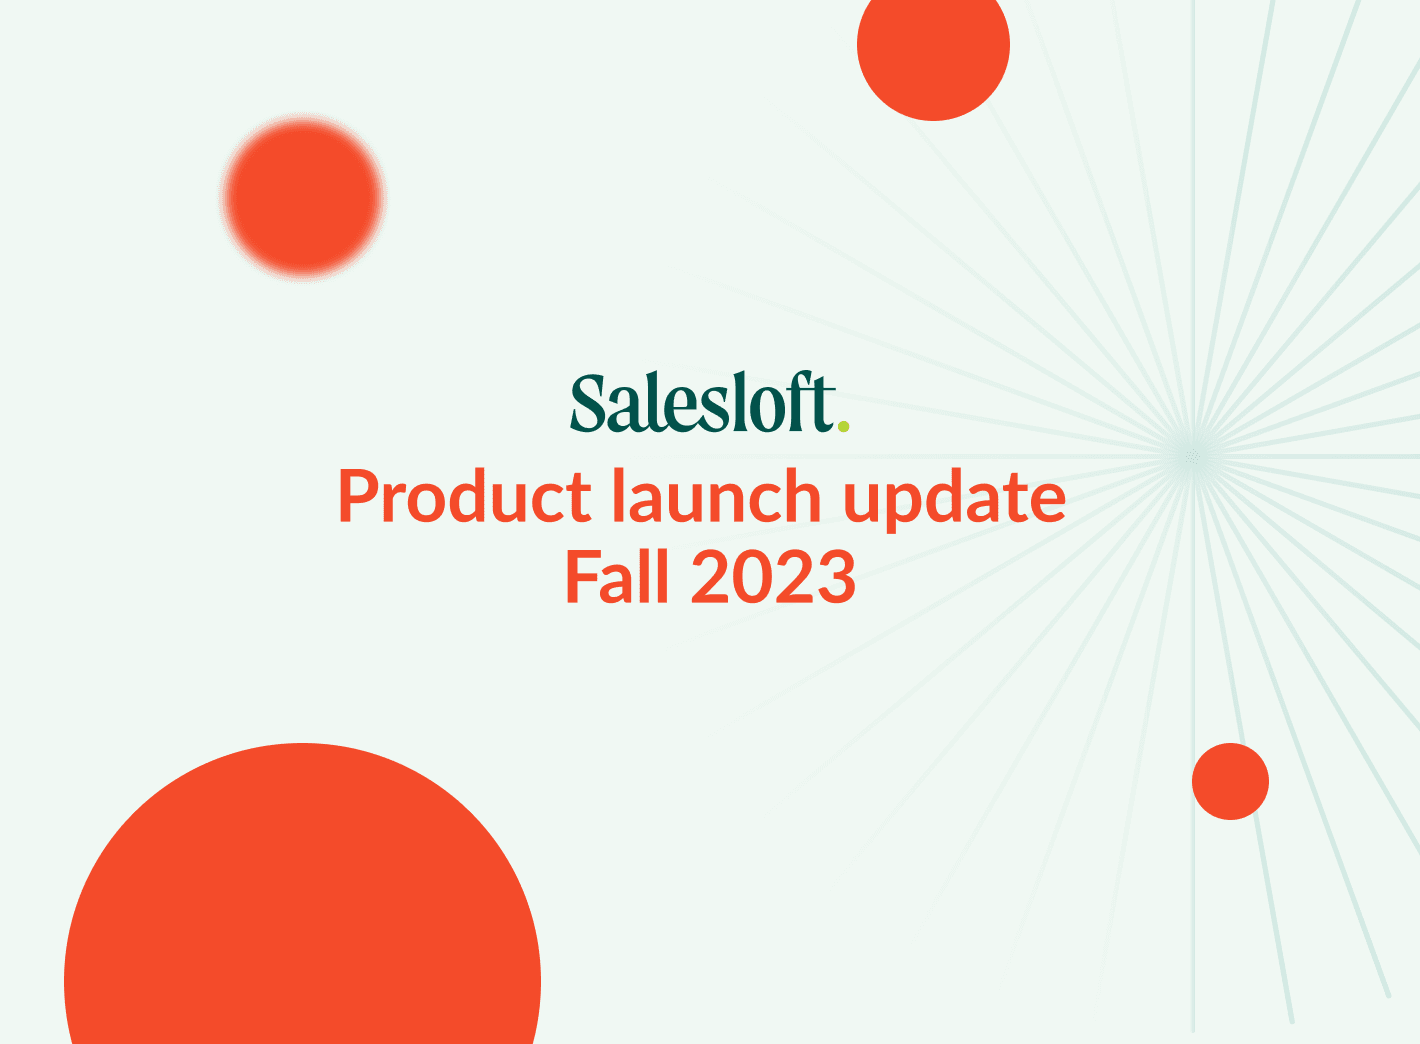 "Salesloft Product Launch update Fall 2023"